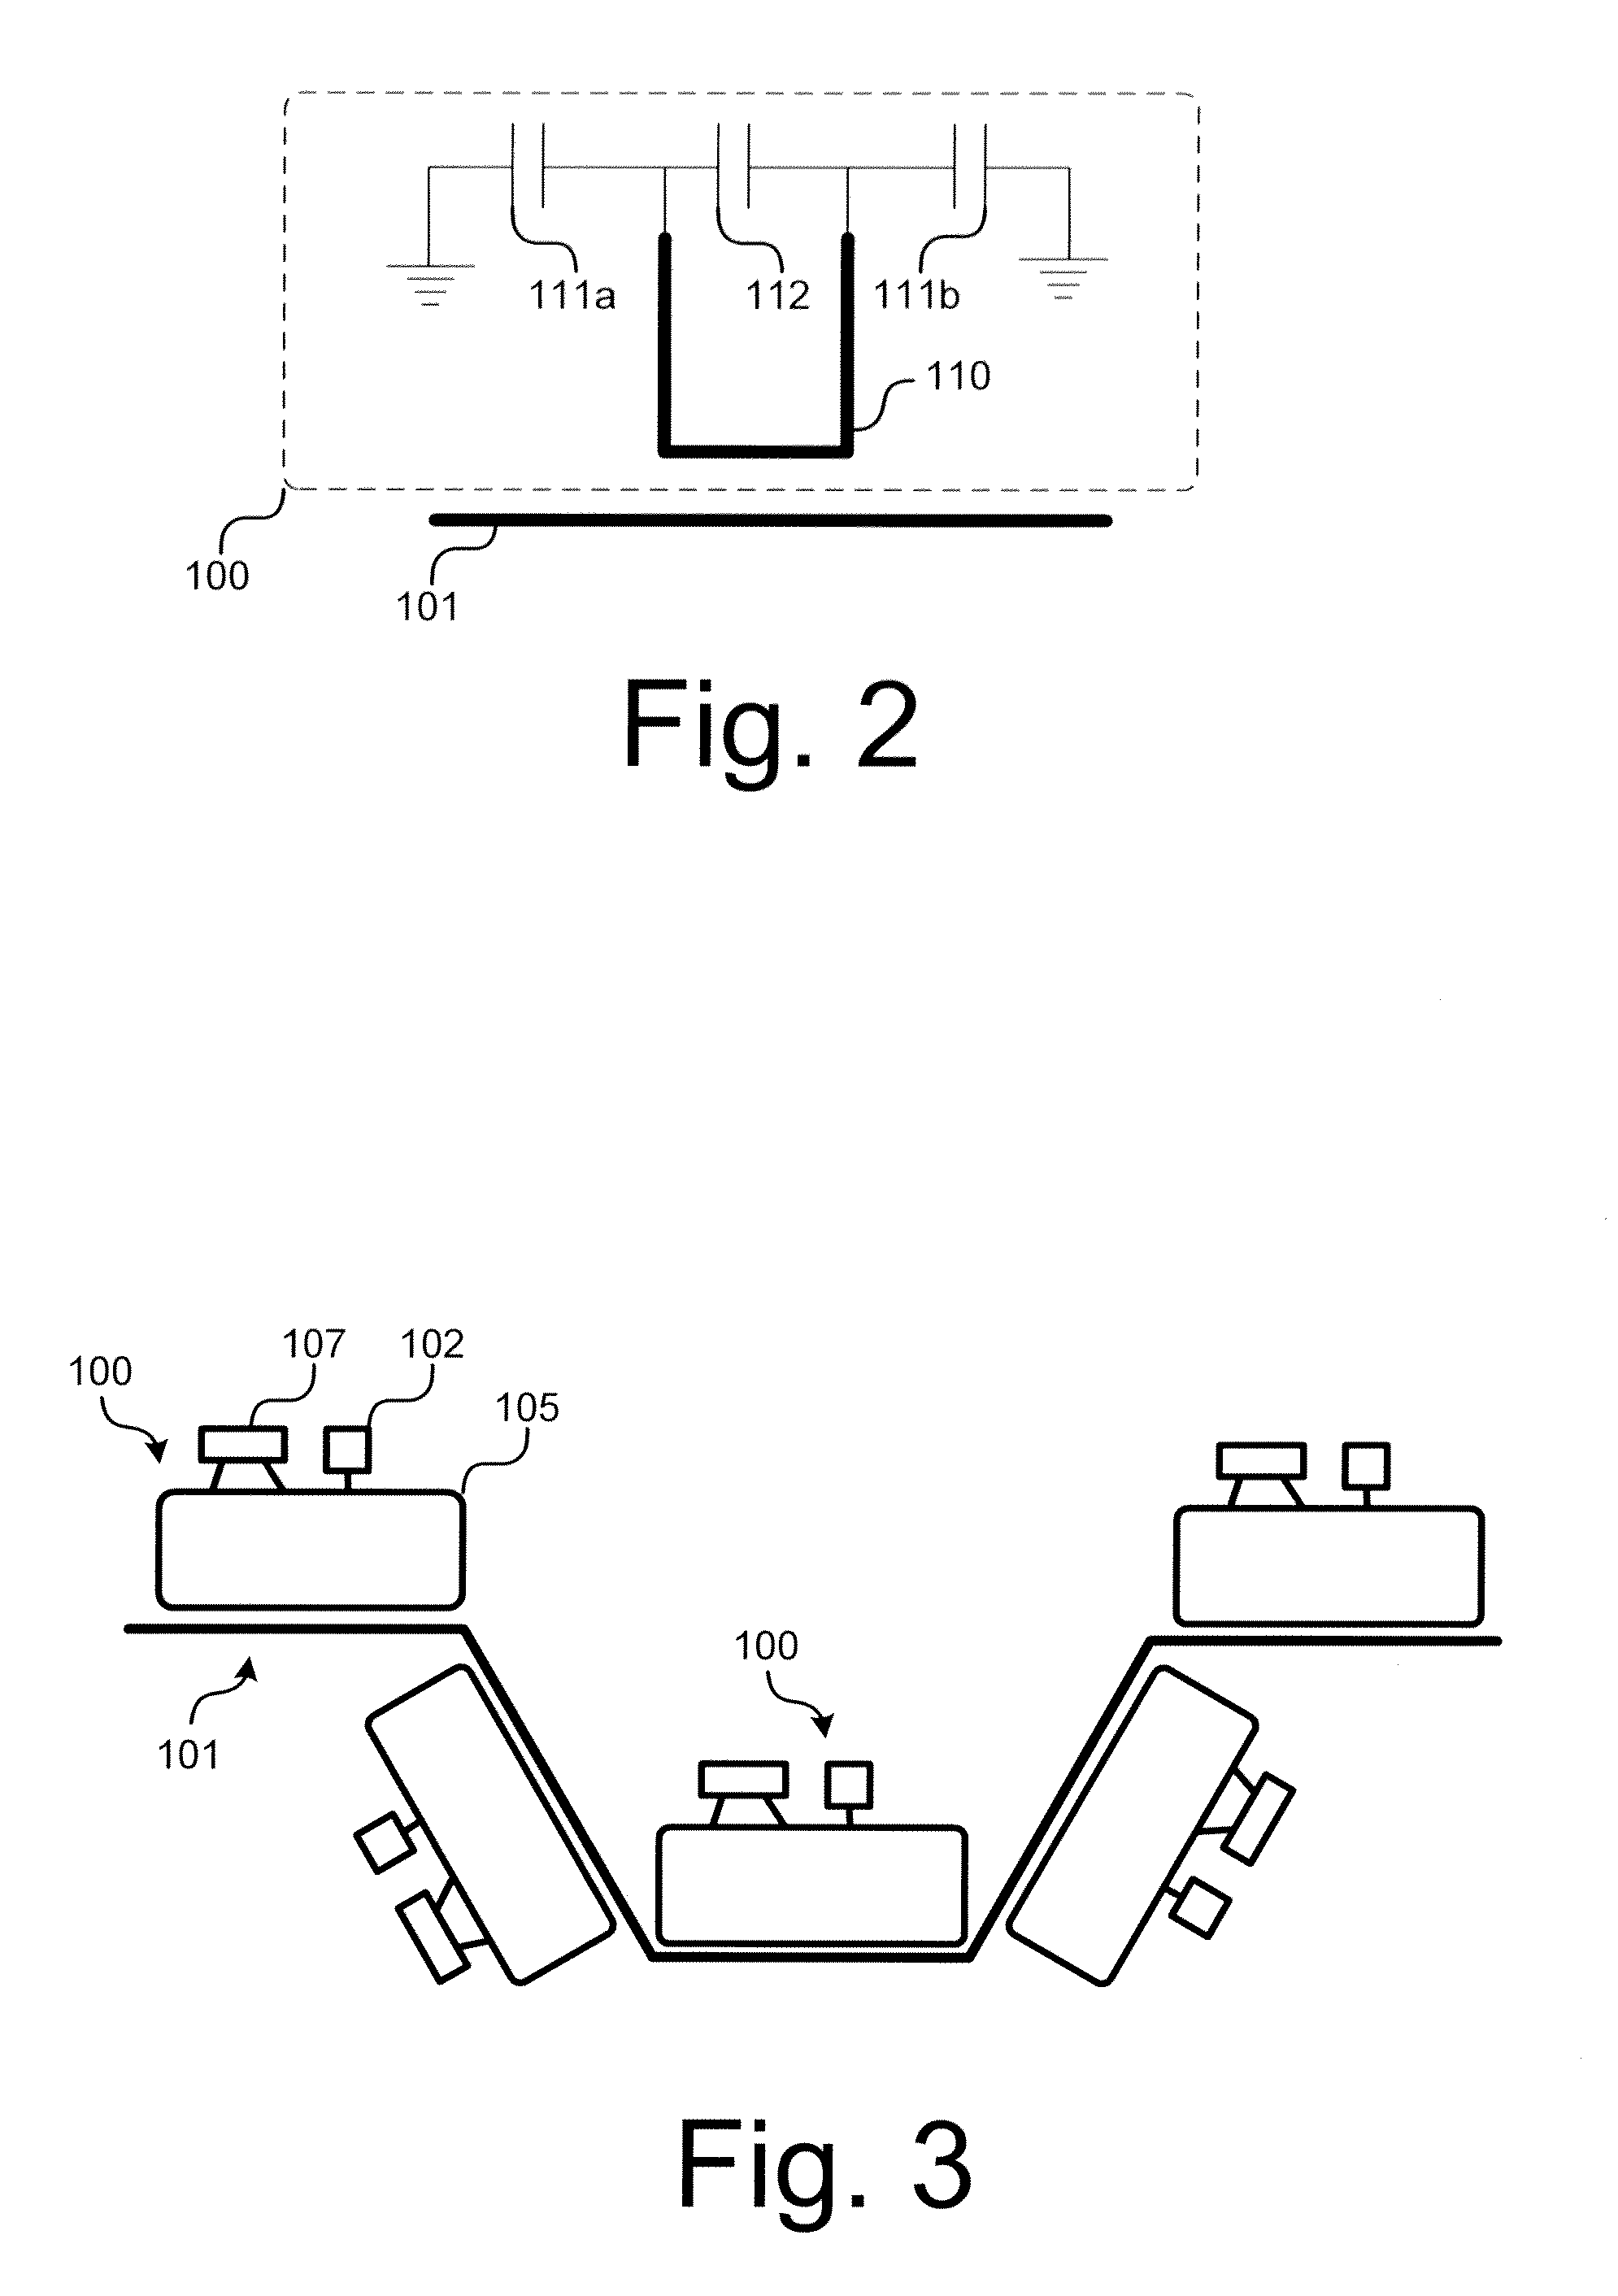 Tunable notch filter including ring resonators having a MEMS capacitor and an attenuator